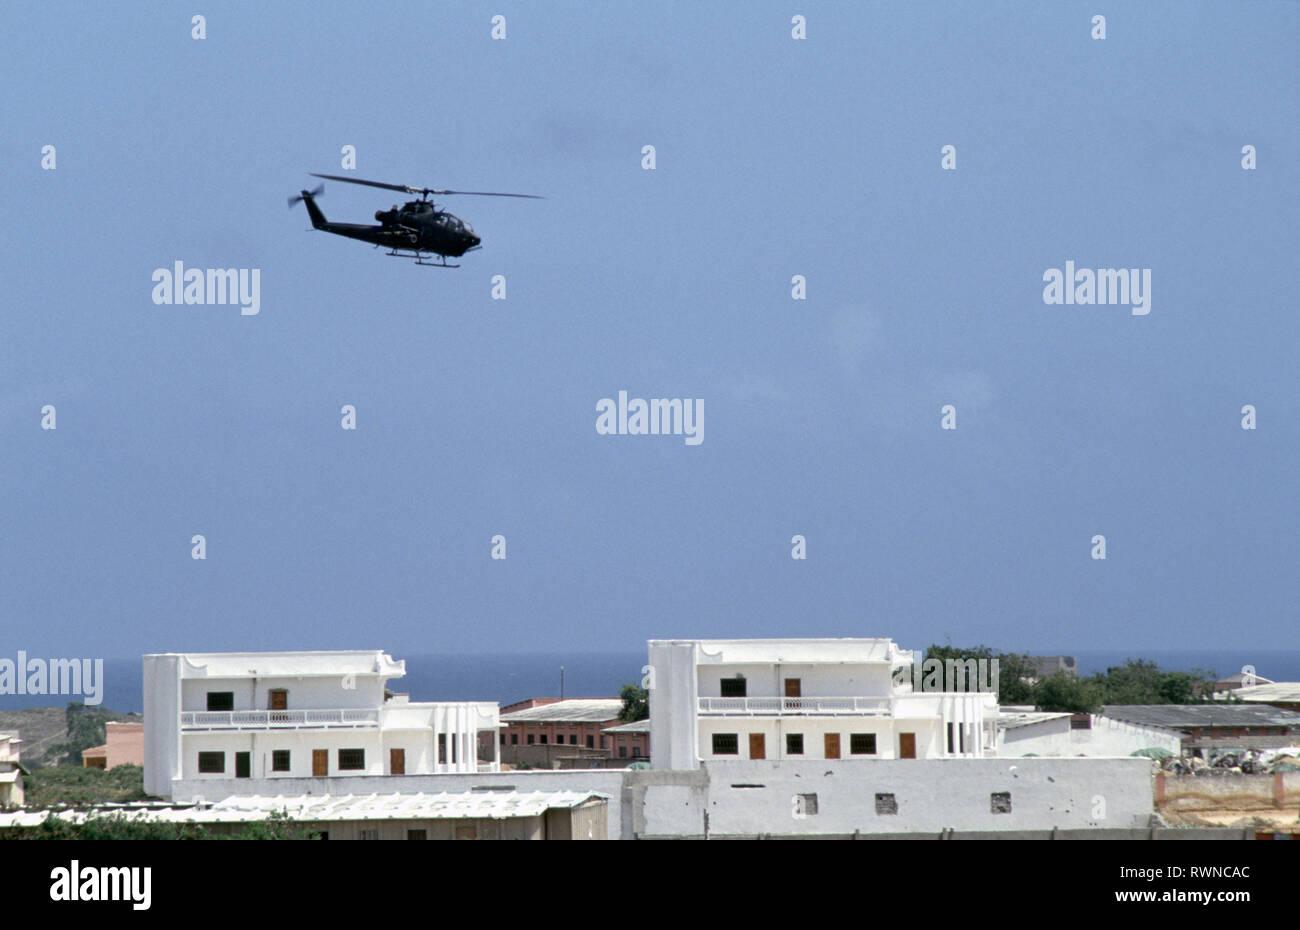 20th October 1993 A U.S. Army Bell AH-1 Cobra attack helicopter patrols low above the rooftops of Mogadishu, Somalia. Stock Photo